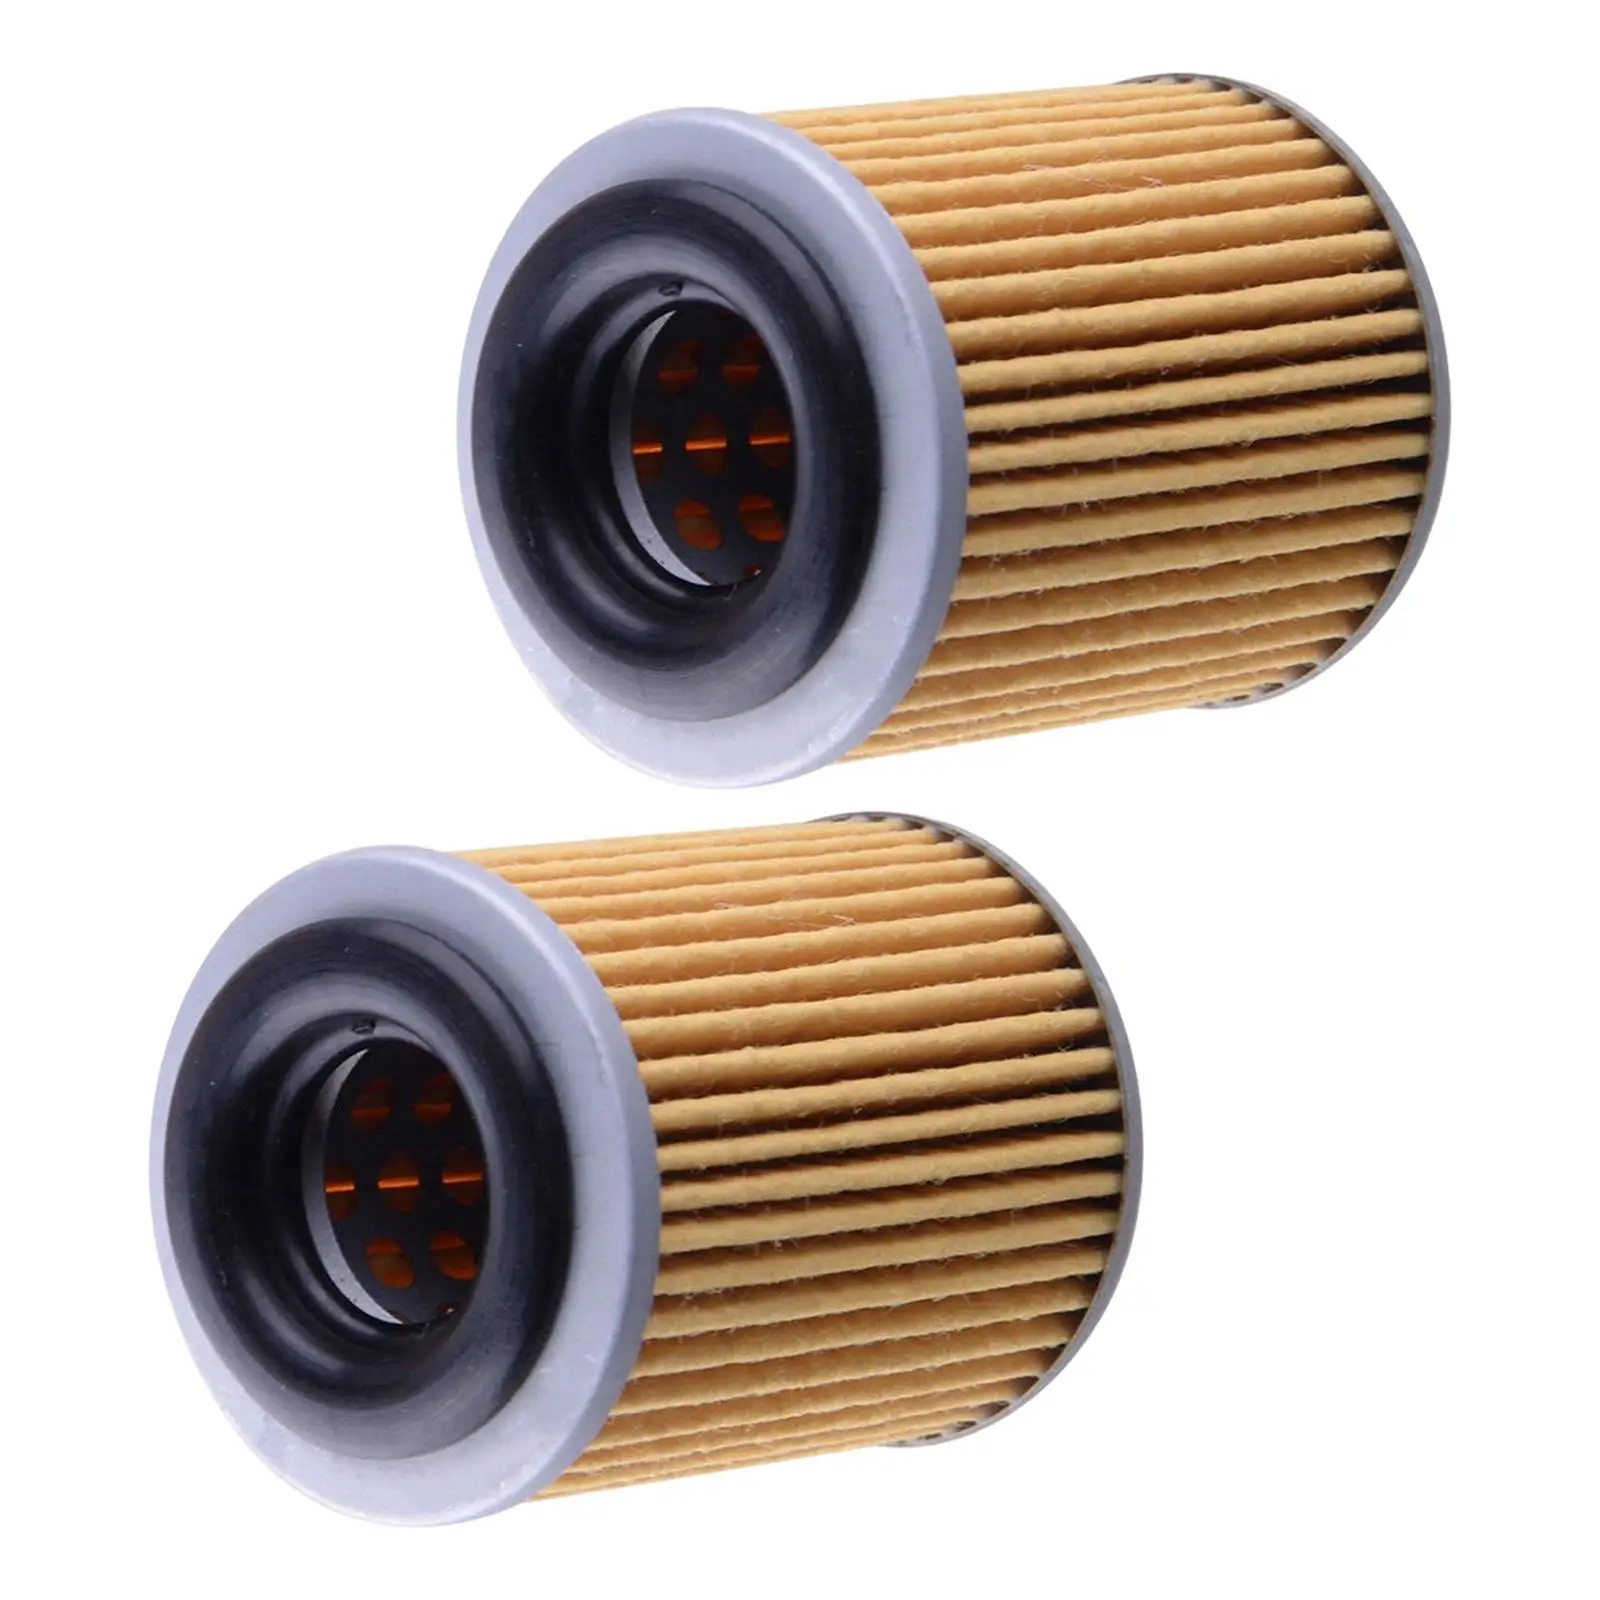 2 Pieces Car Automatic Transmission Filter Cotton Oil Cooler Filter Fit for ALTIMA 2.5L 3.5L 31726-1XF00 317261XF00